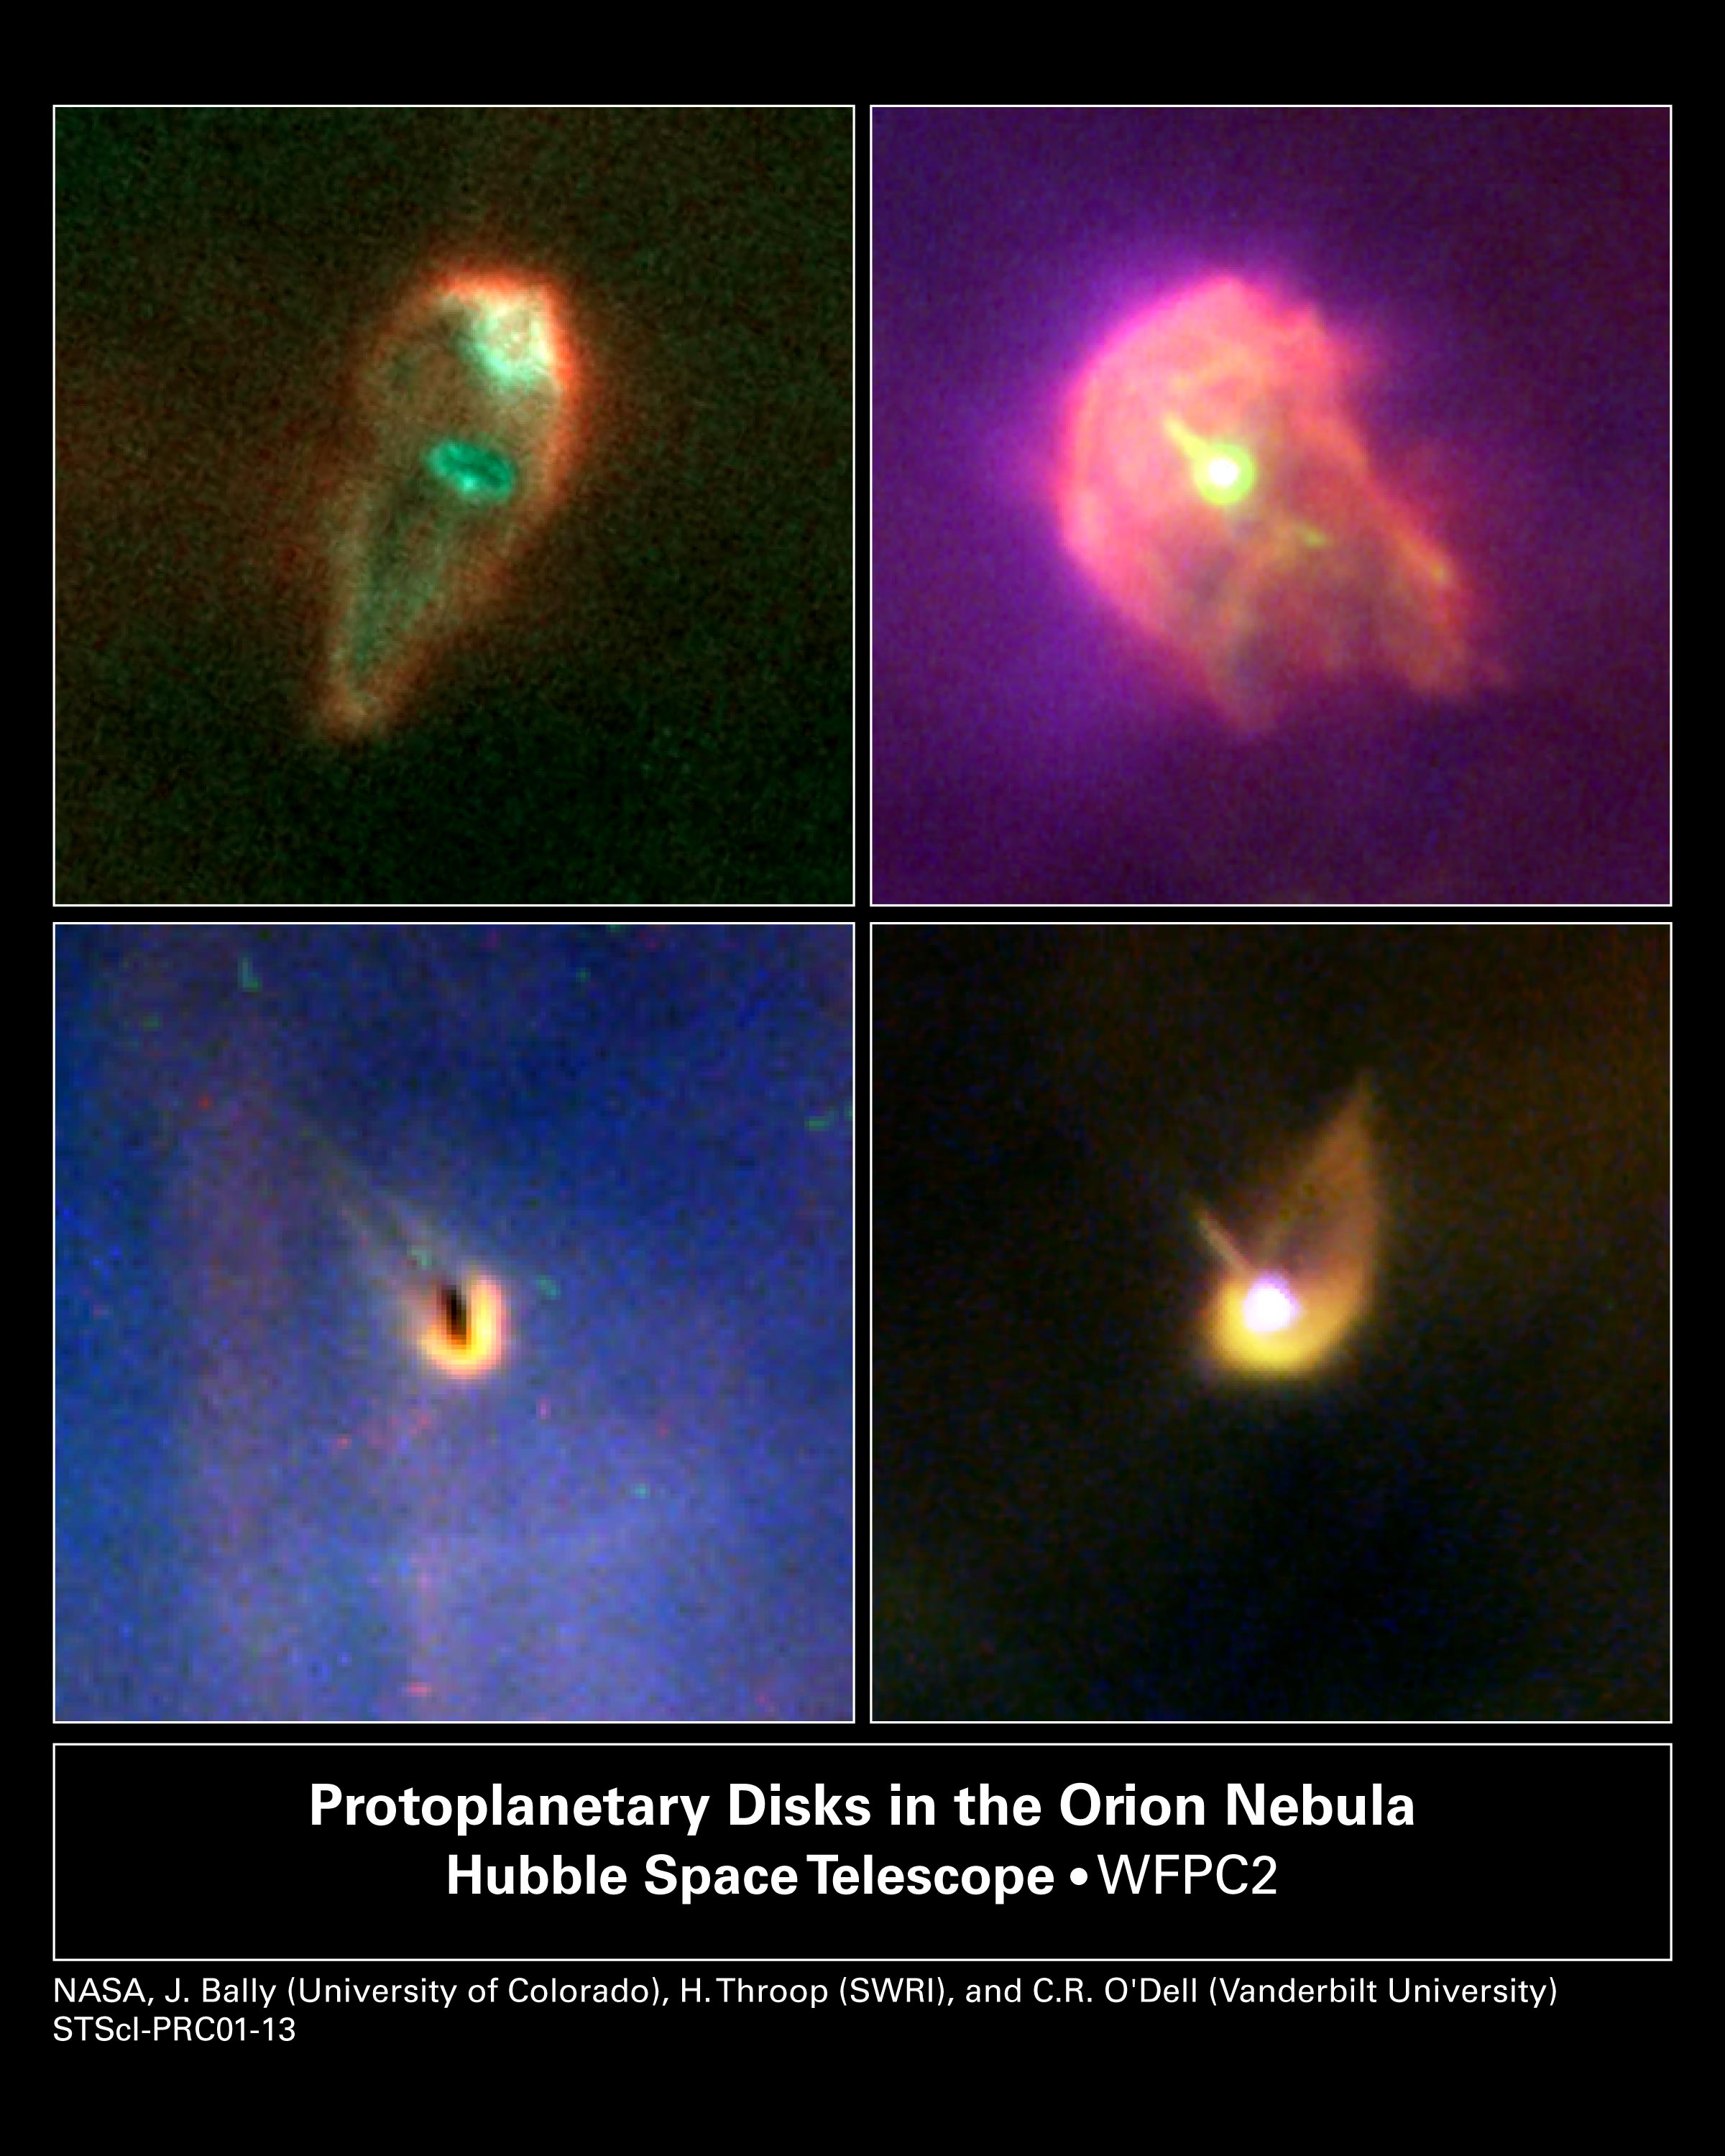 Four images of planetary disks in Orion. Upper-left looks like an upside down raindrop that is reddish with bright blobs of bright-green within. Upper-right is a pink, gaseous blob with a bright yellow spot within. Lower-left is a bright-yellow crescent with a dark core against a blue background. Lower-right image is a bright-yellow crescent with a long tail and a bright-white core against a black background.